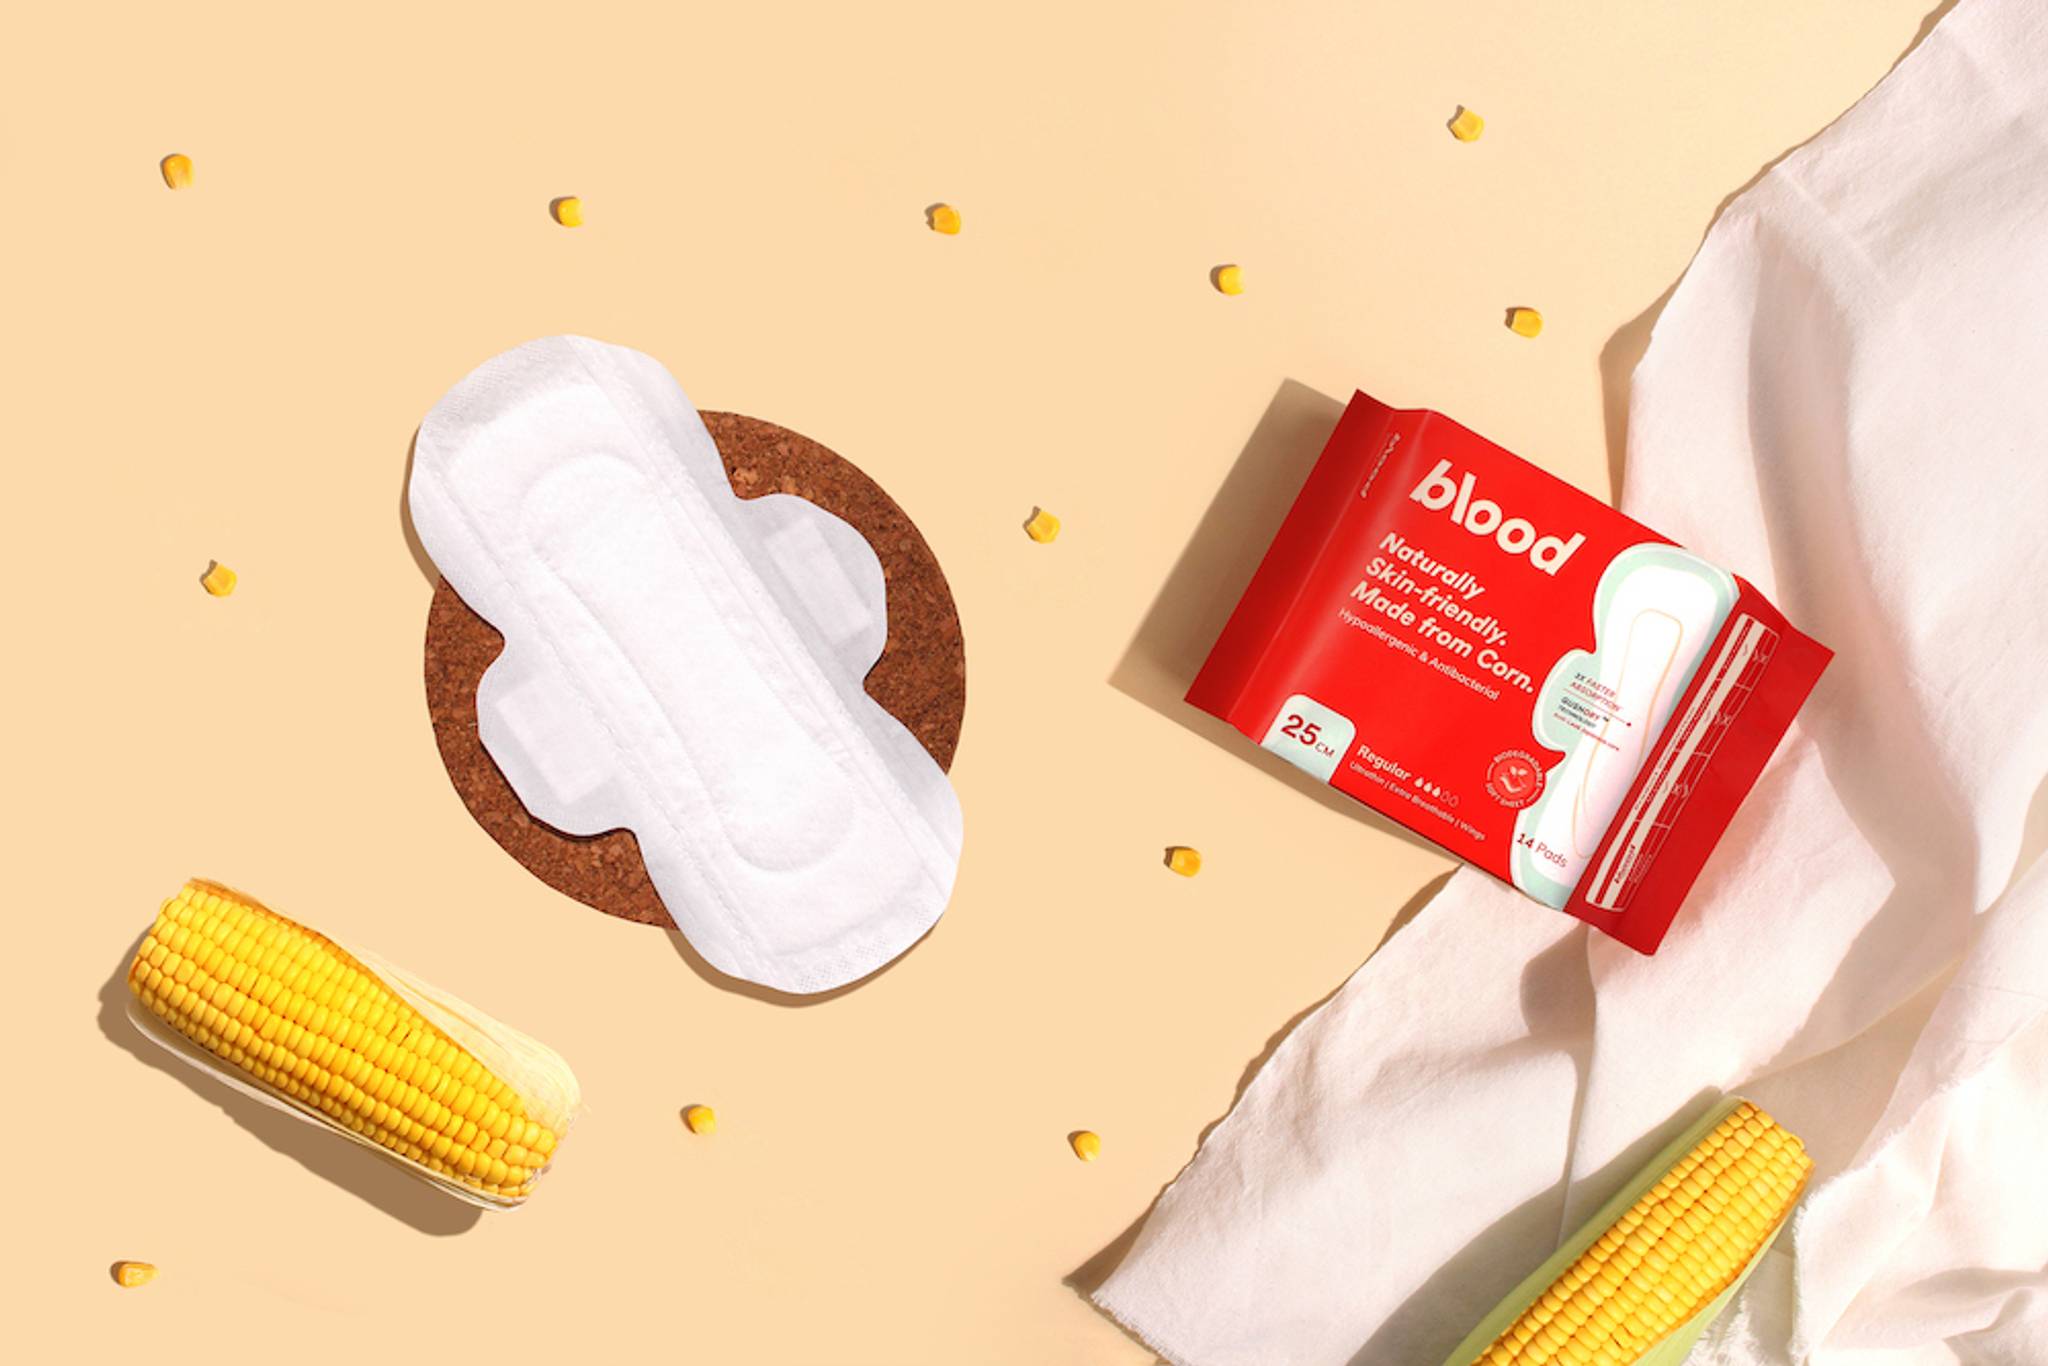 Blood brings Singaporeans eco-conscious period products